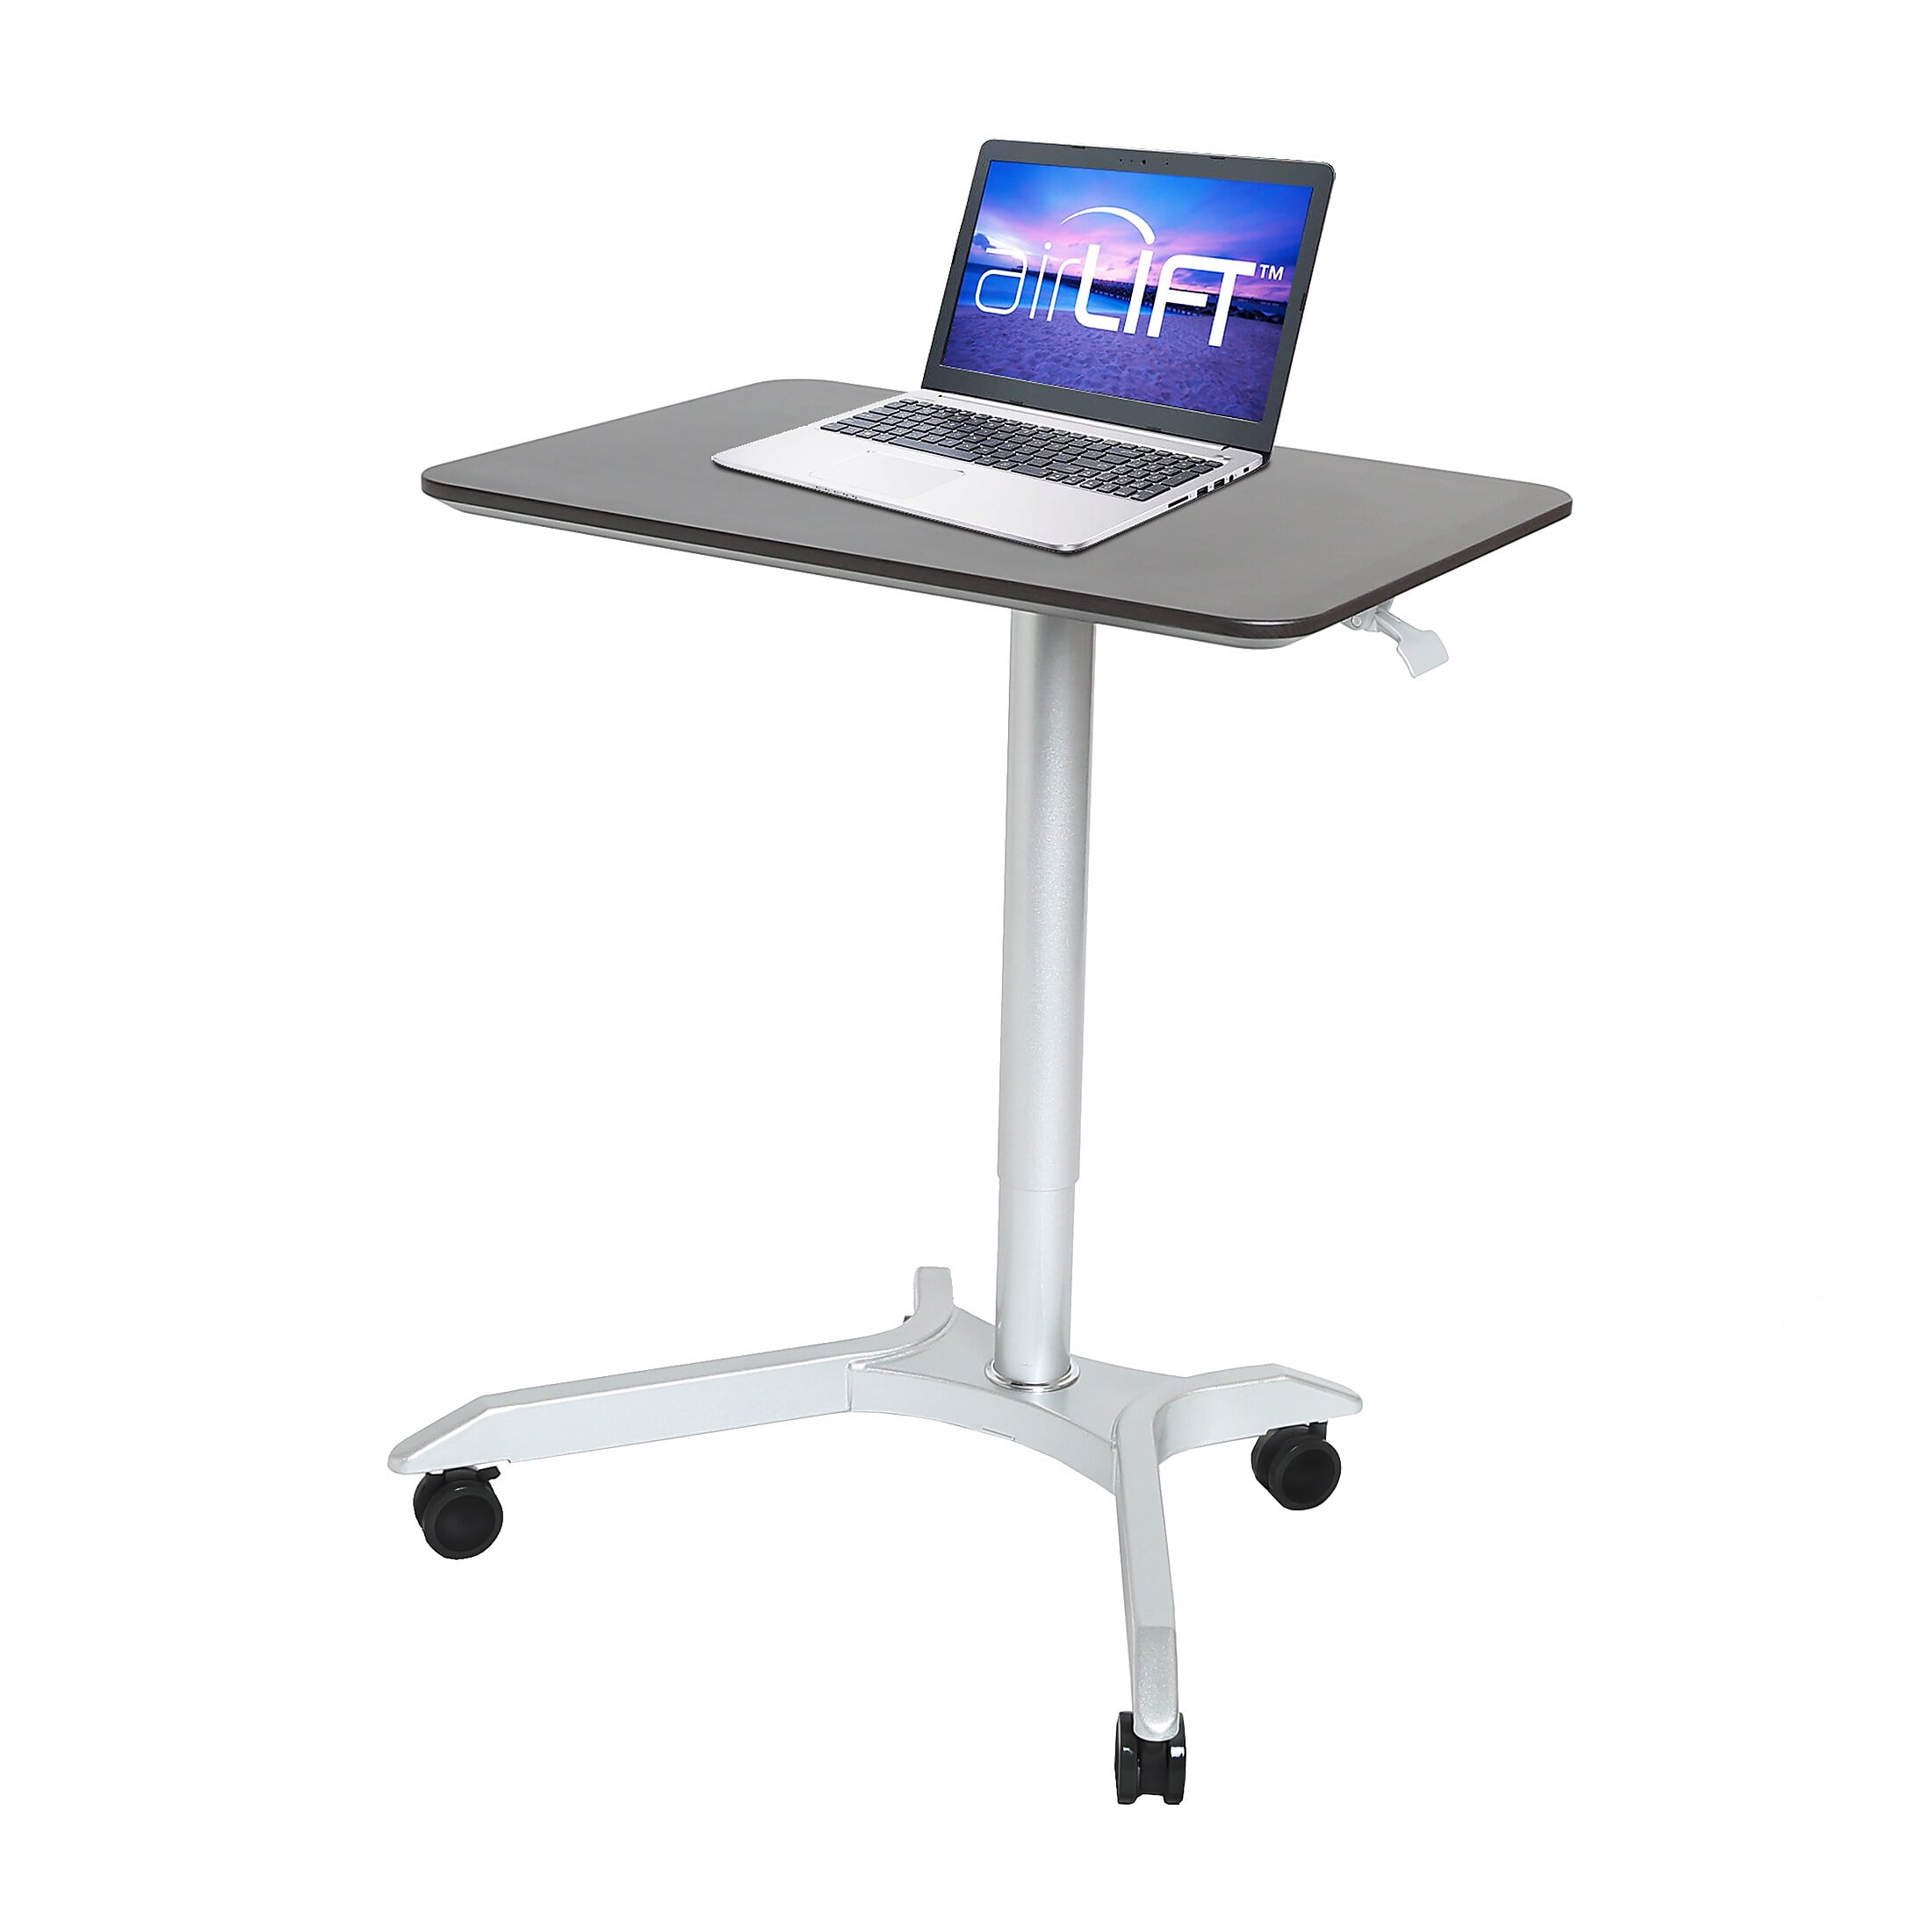 Airlift Xl Pneumatic Sit Stand Mobile, Airlift Pneumatic Laptop Computer Sit Stand Mobile Desk Cartoon